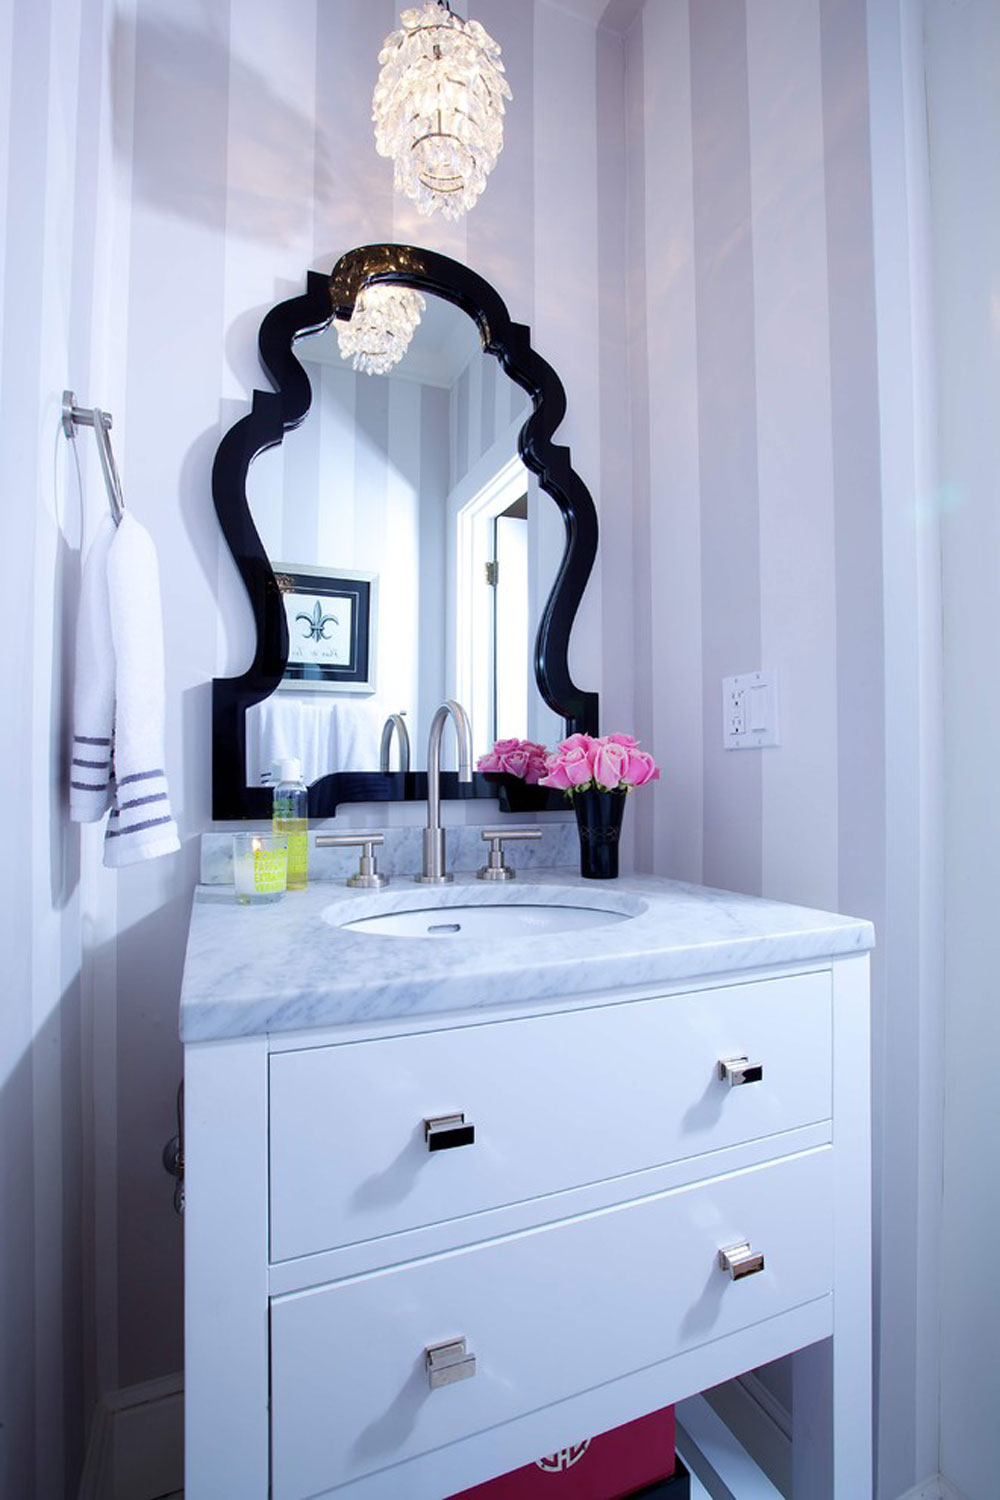 Vintage-Modern-Living-by-Kerrie-Kelly-Design-Lab Popular bathroom colors and ideas: how to use them for decorating